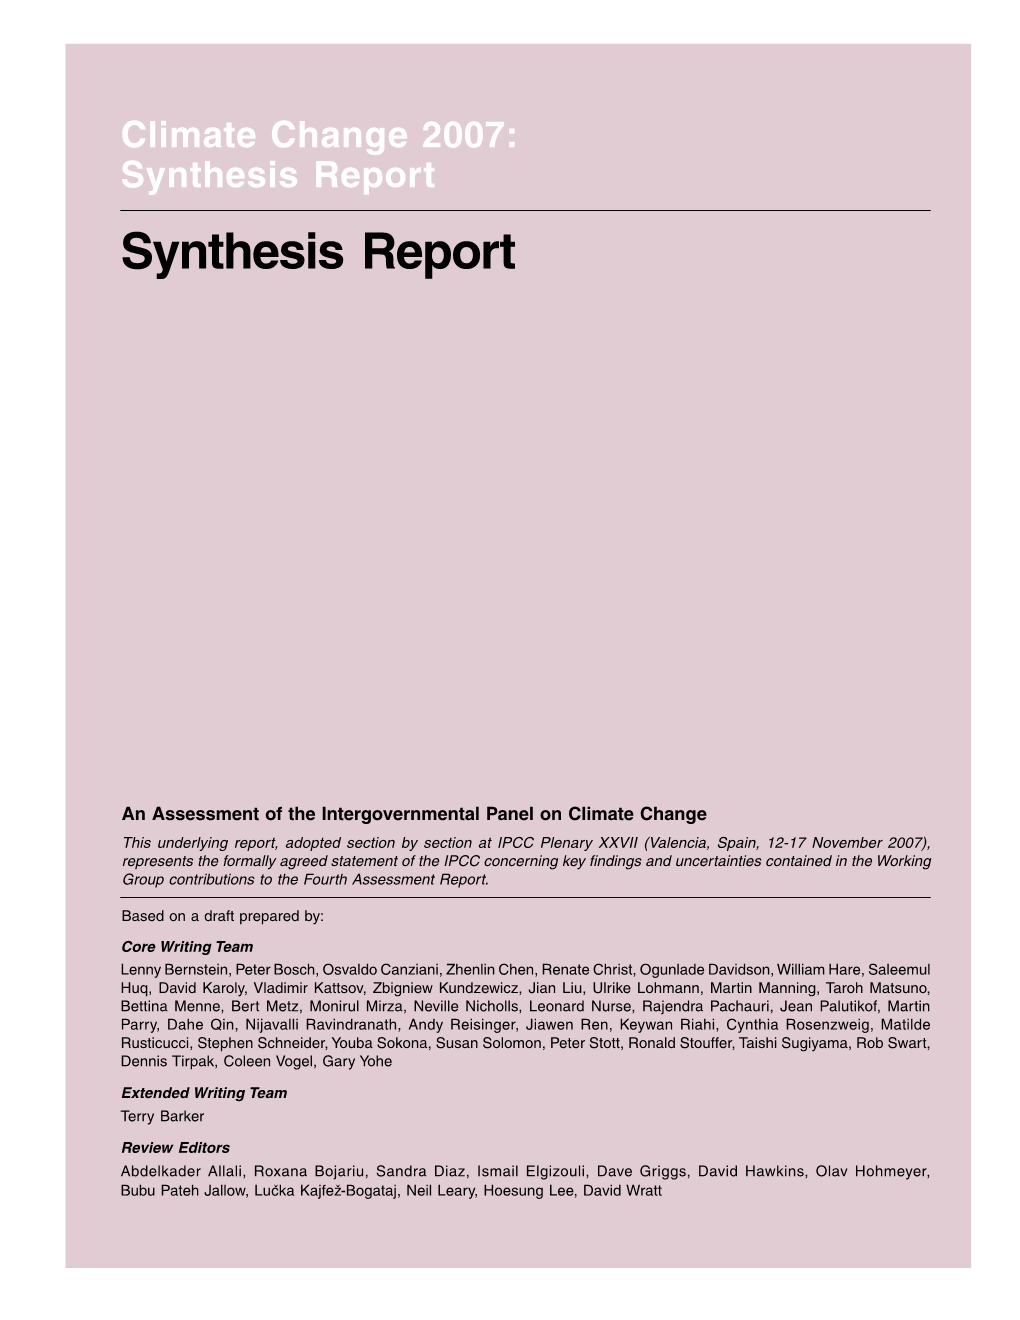 Climate Change 2007: Synthesis Report Synthesis Report